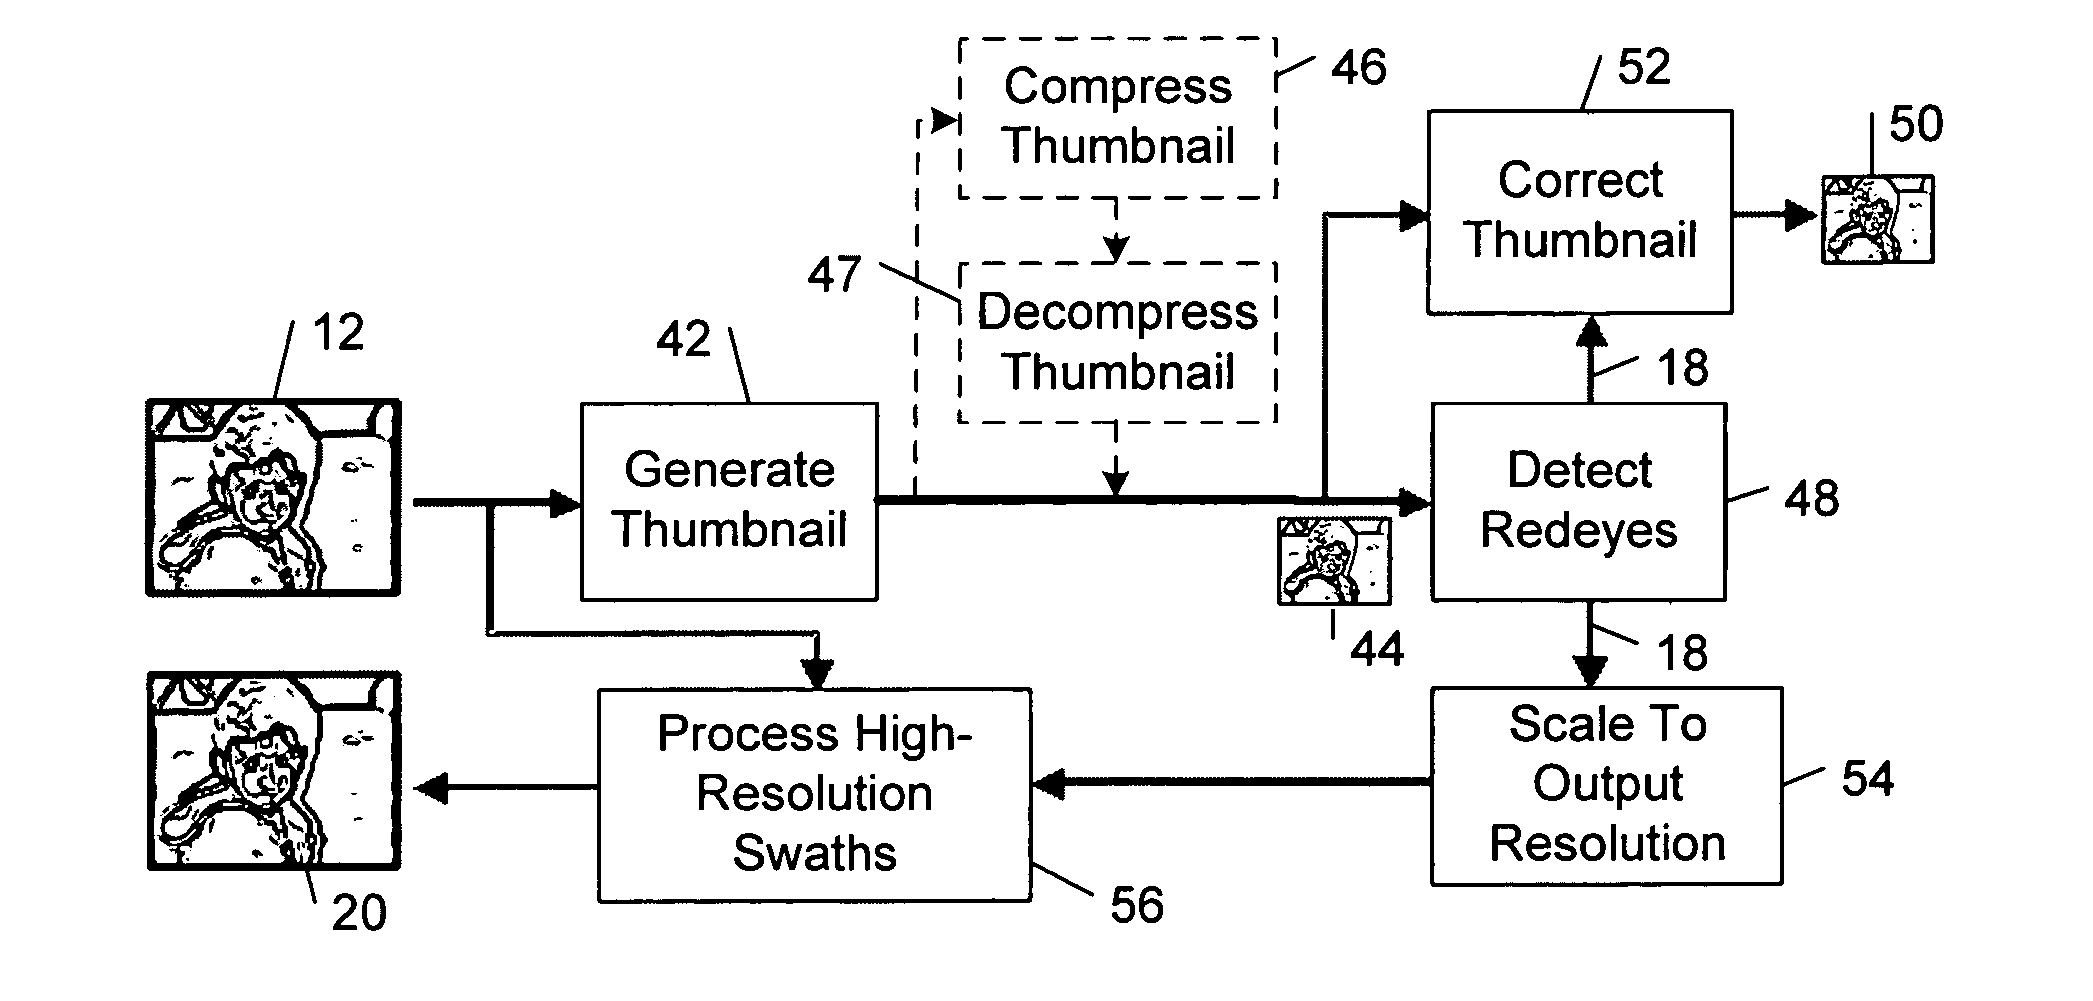 Systems and methods of detecting and correcting redeye in an image suitable for embedded applications